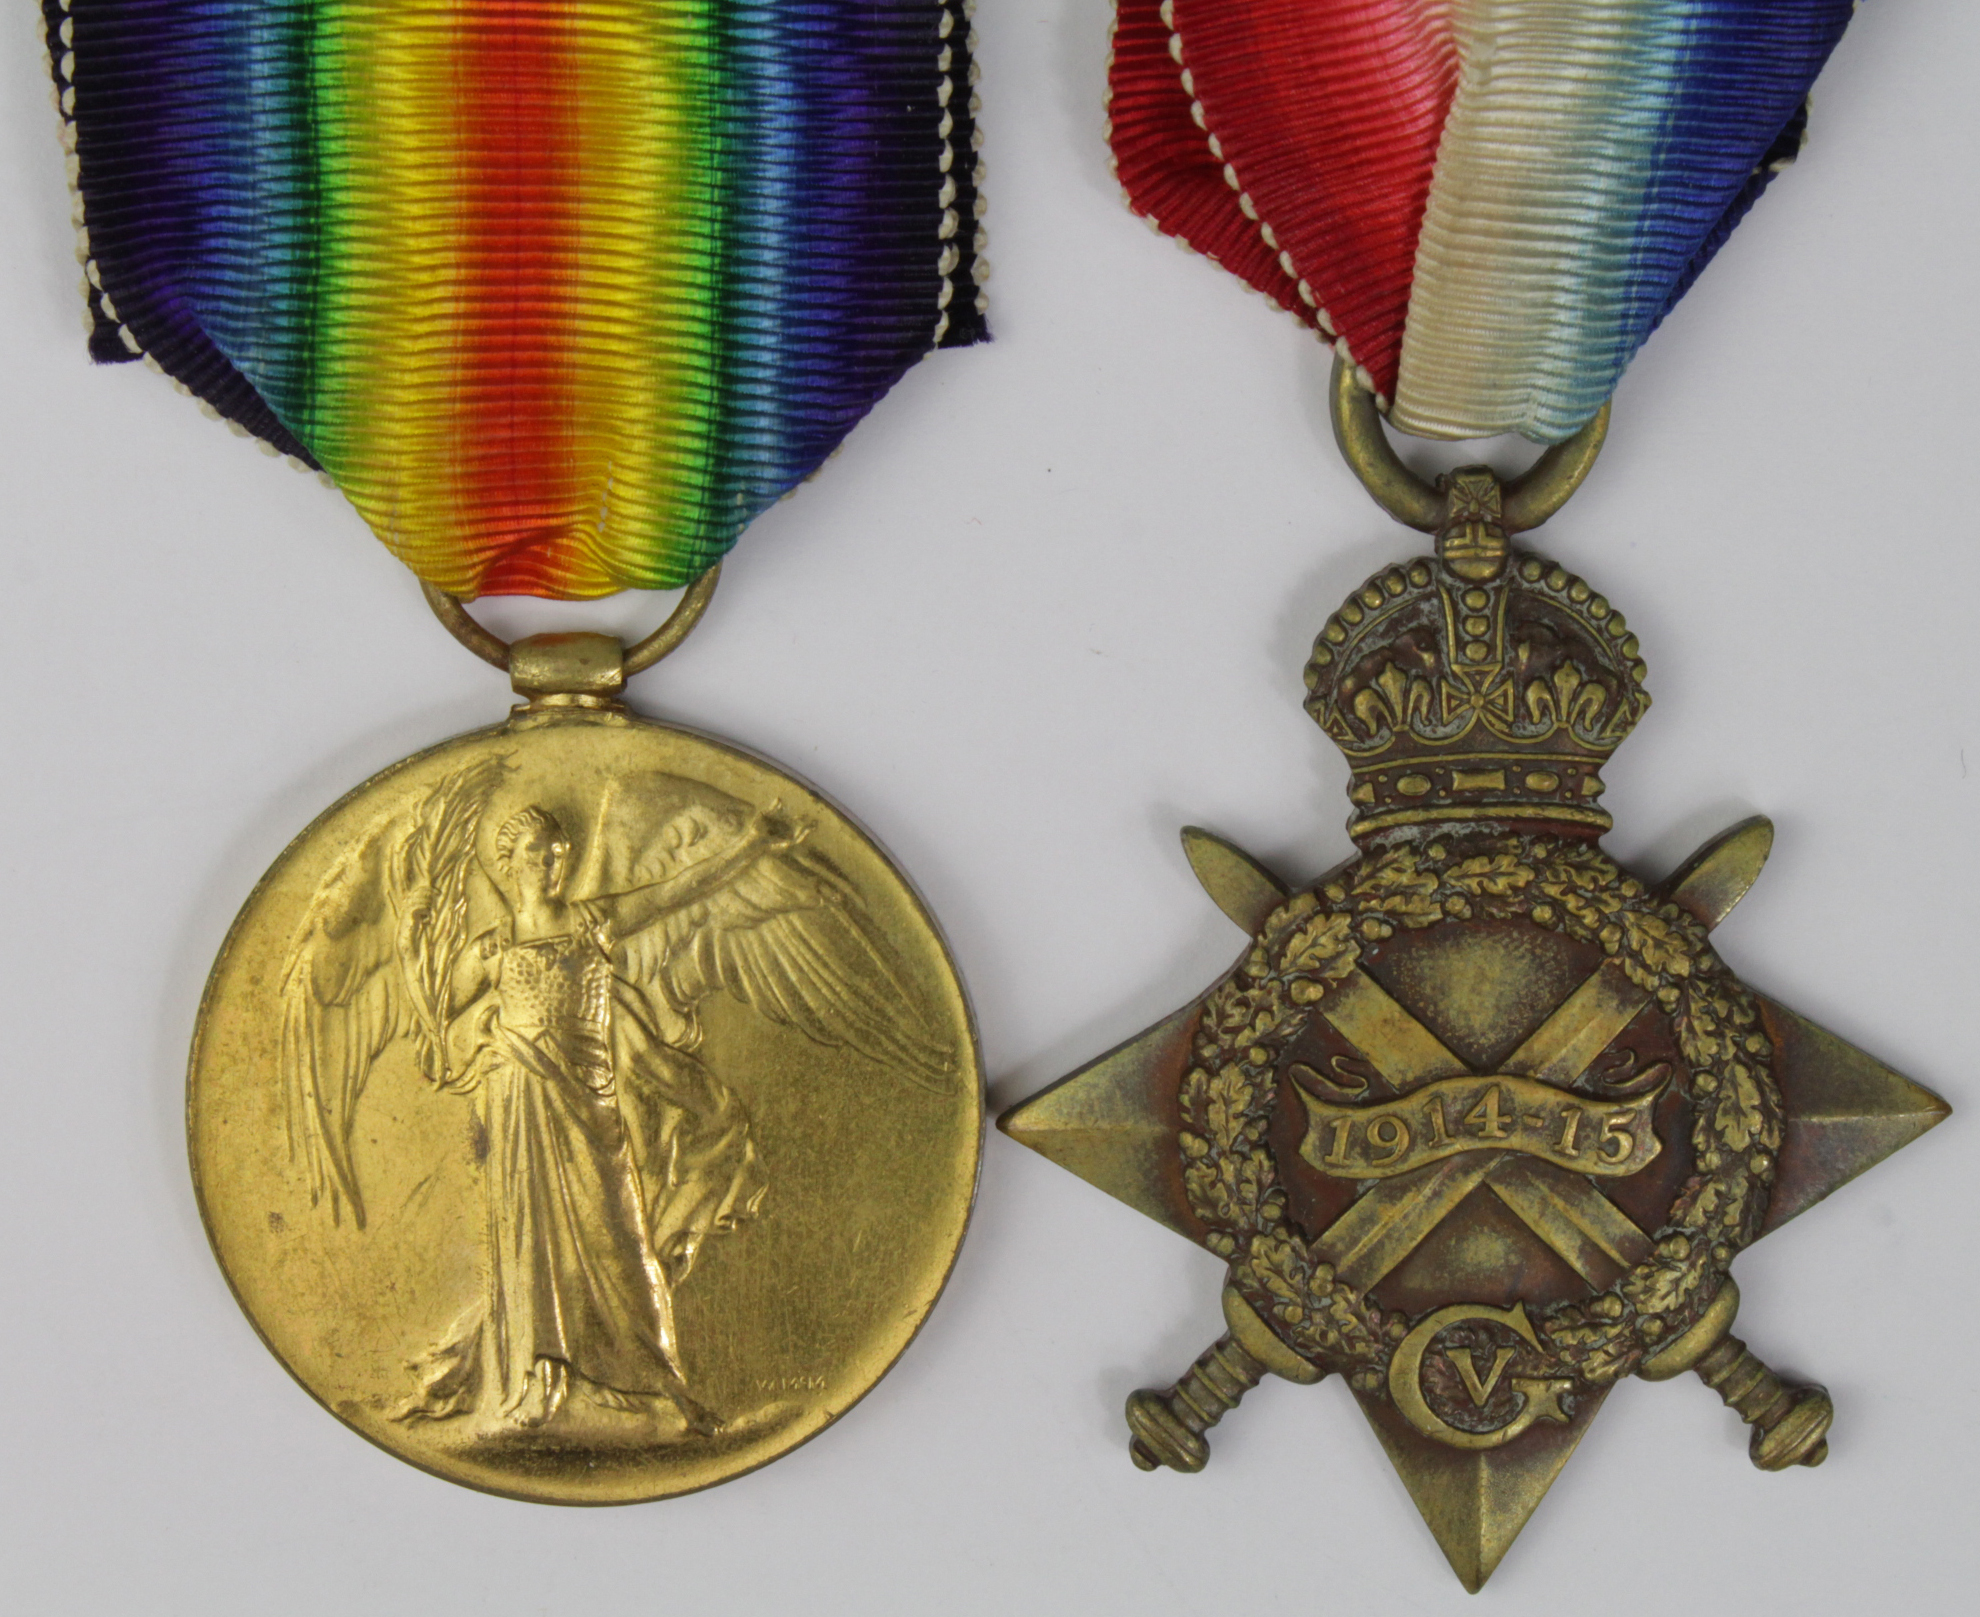 1915 Star and Victory Medal to 8972 C.S.May J Palmer Essex Regt. KIA 20/7/1916 with the 10th Bn.